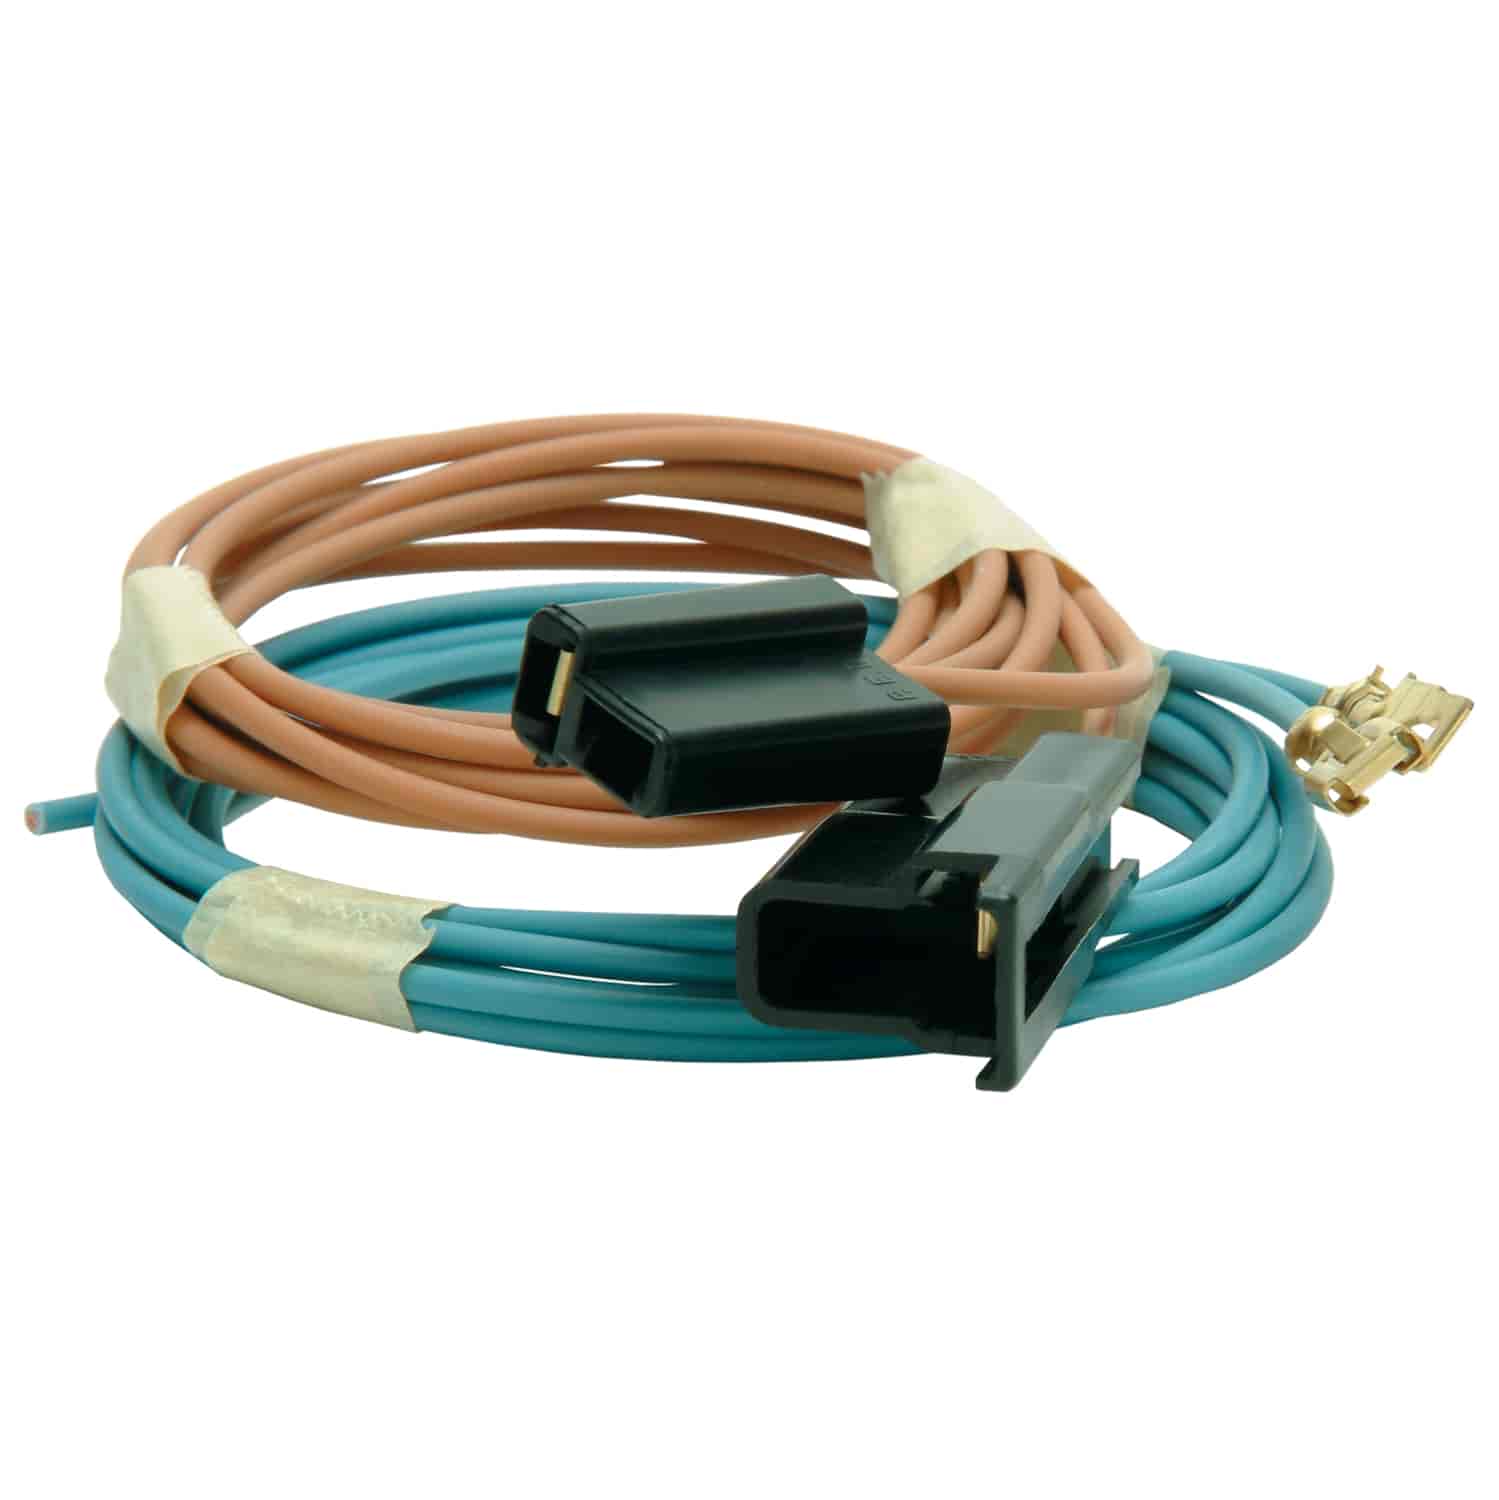 Potluck Pigtail Wiring Connector - Two Contacts